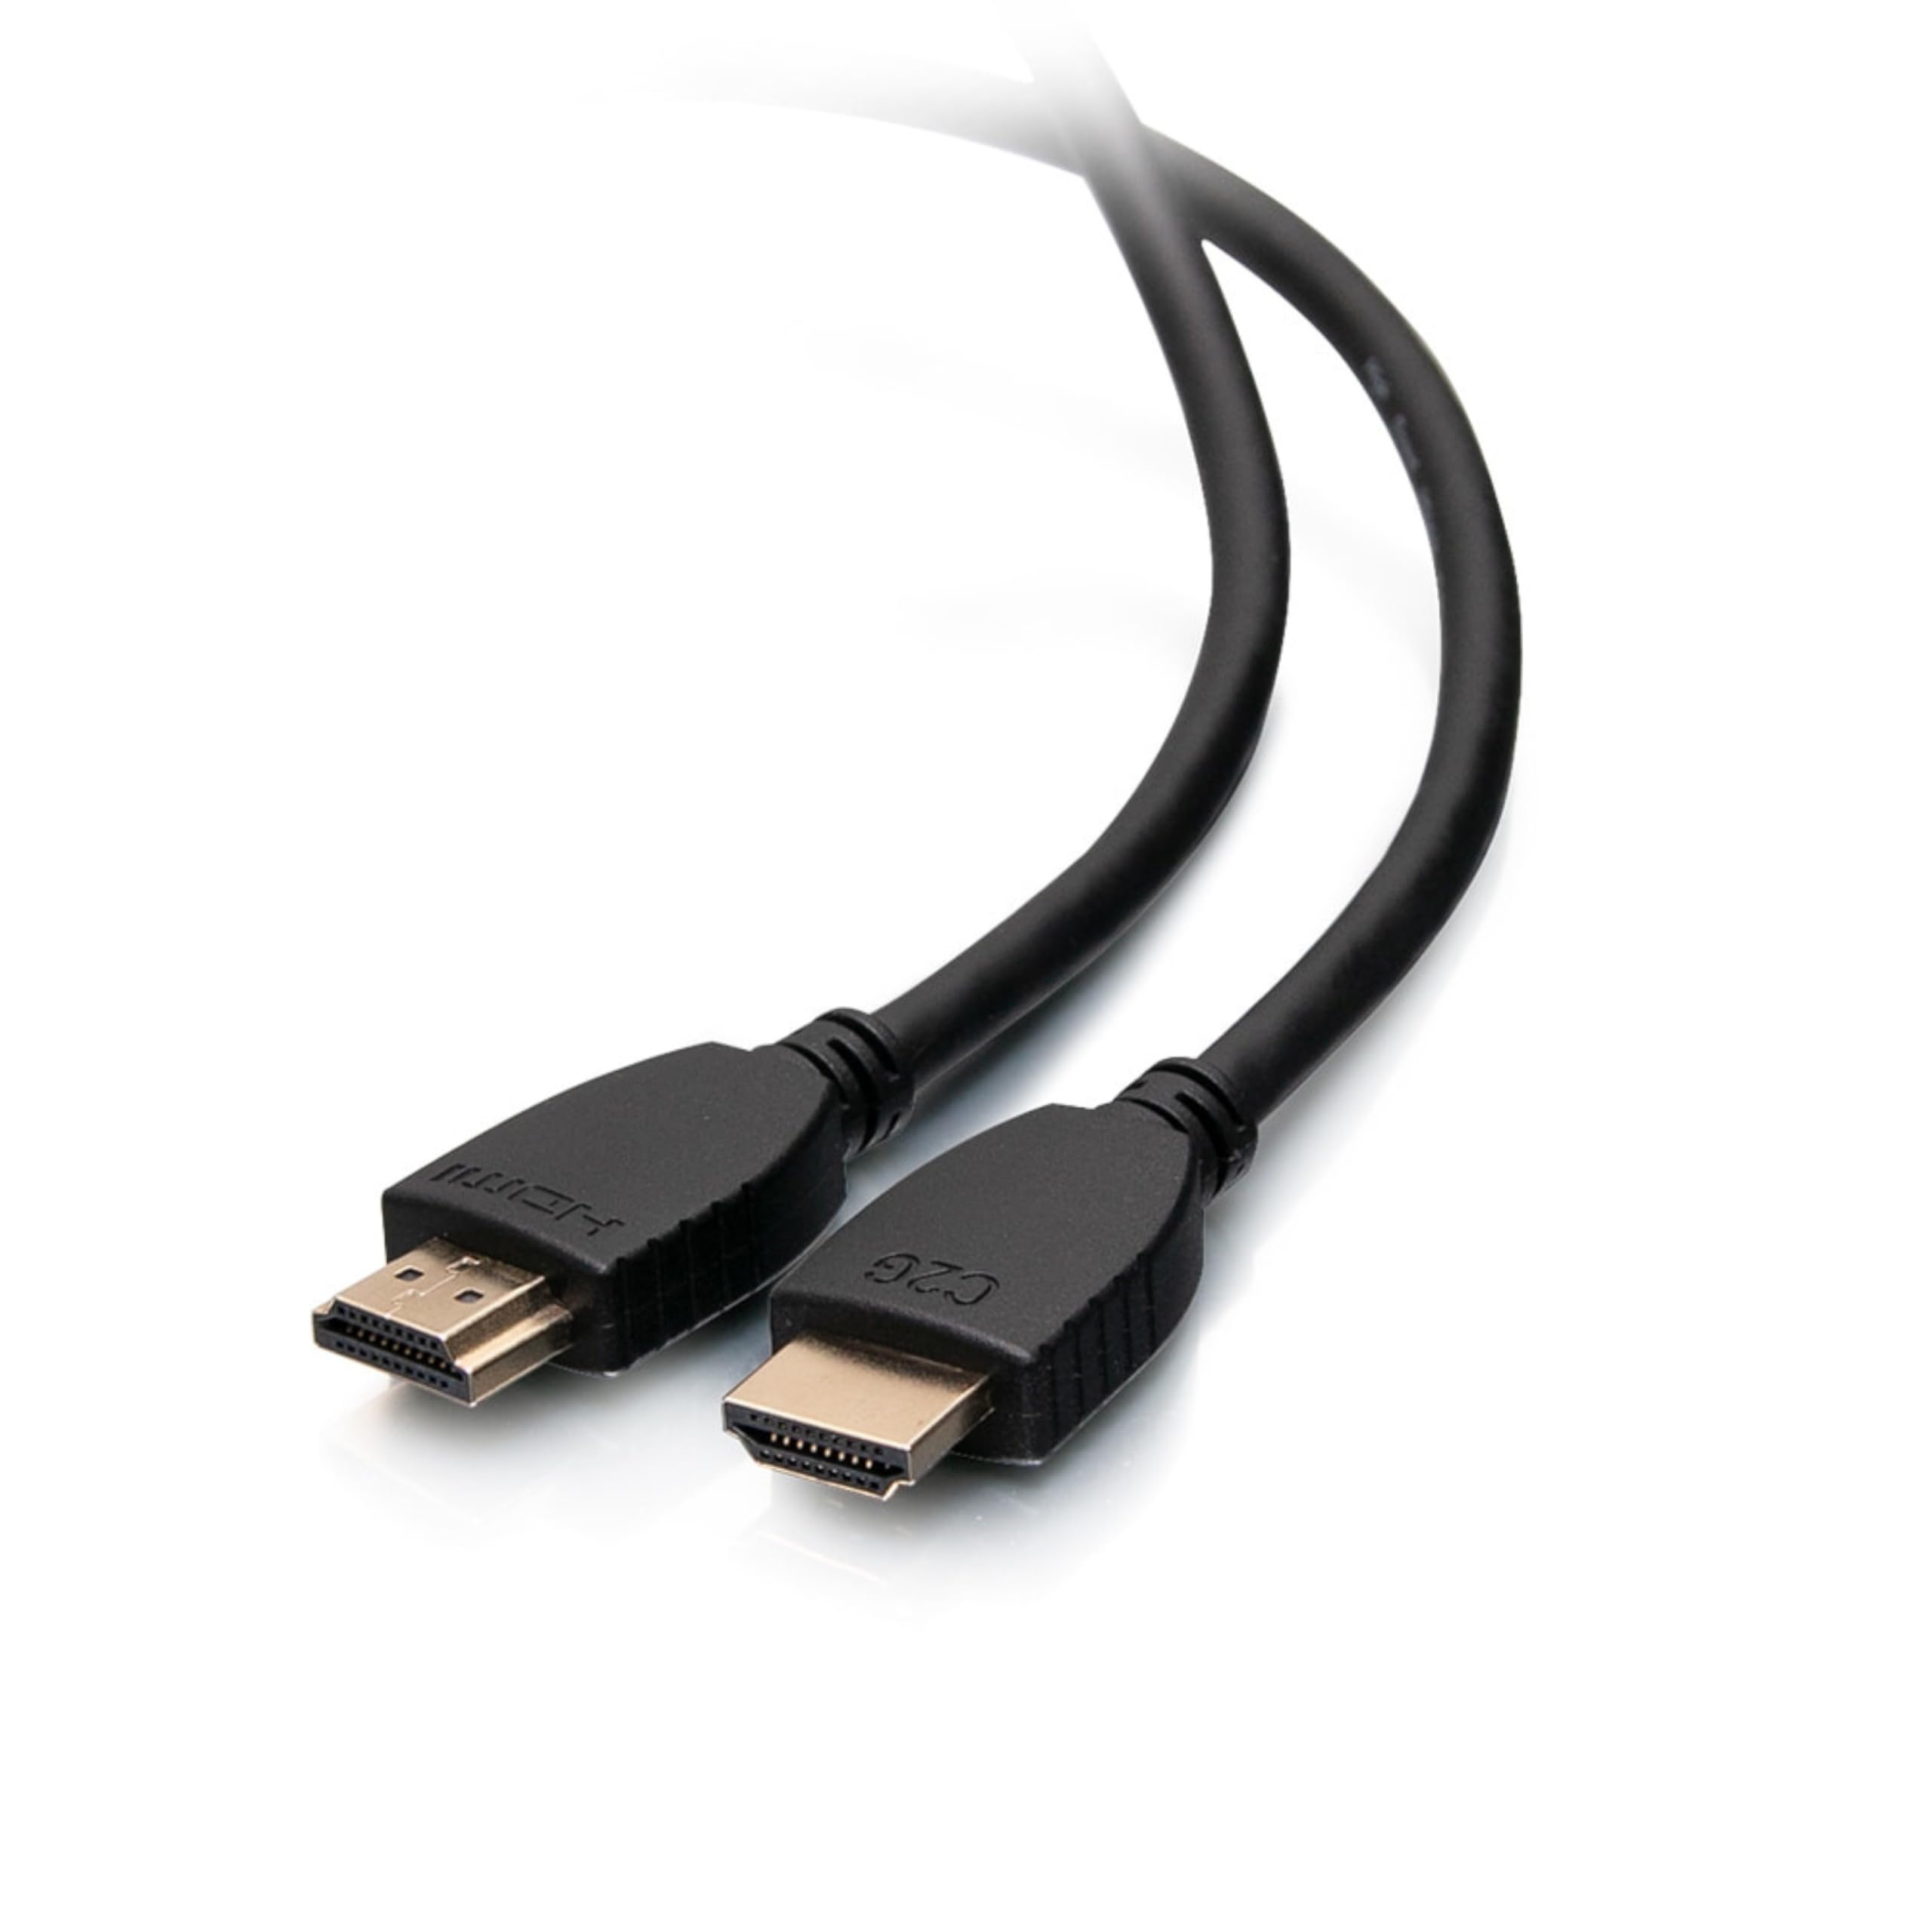 A laptop with a disconnected HDMI cable